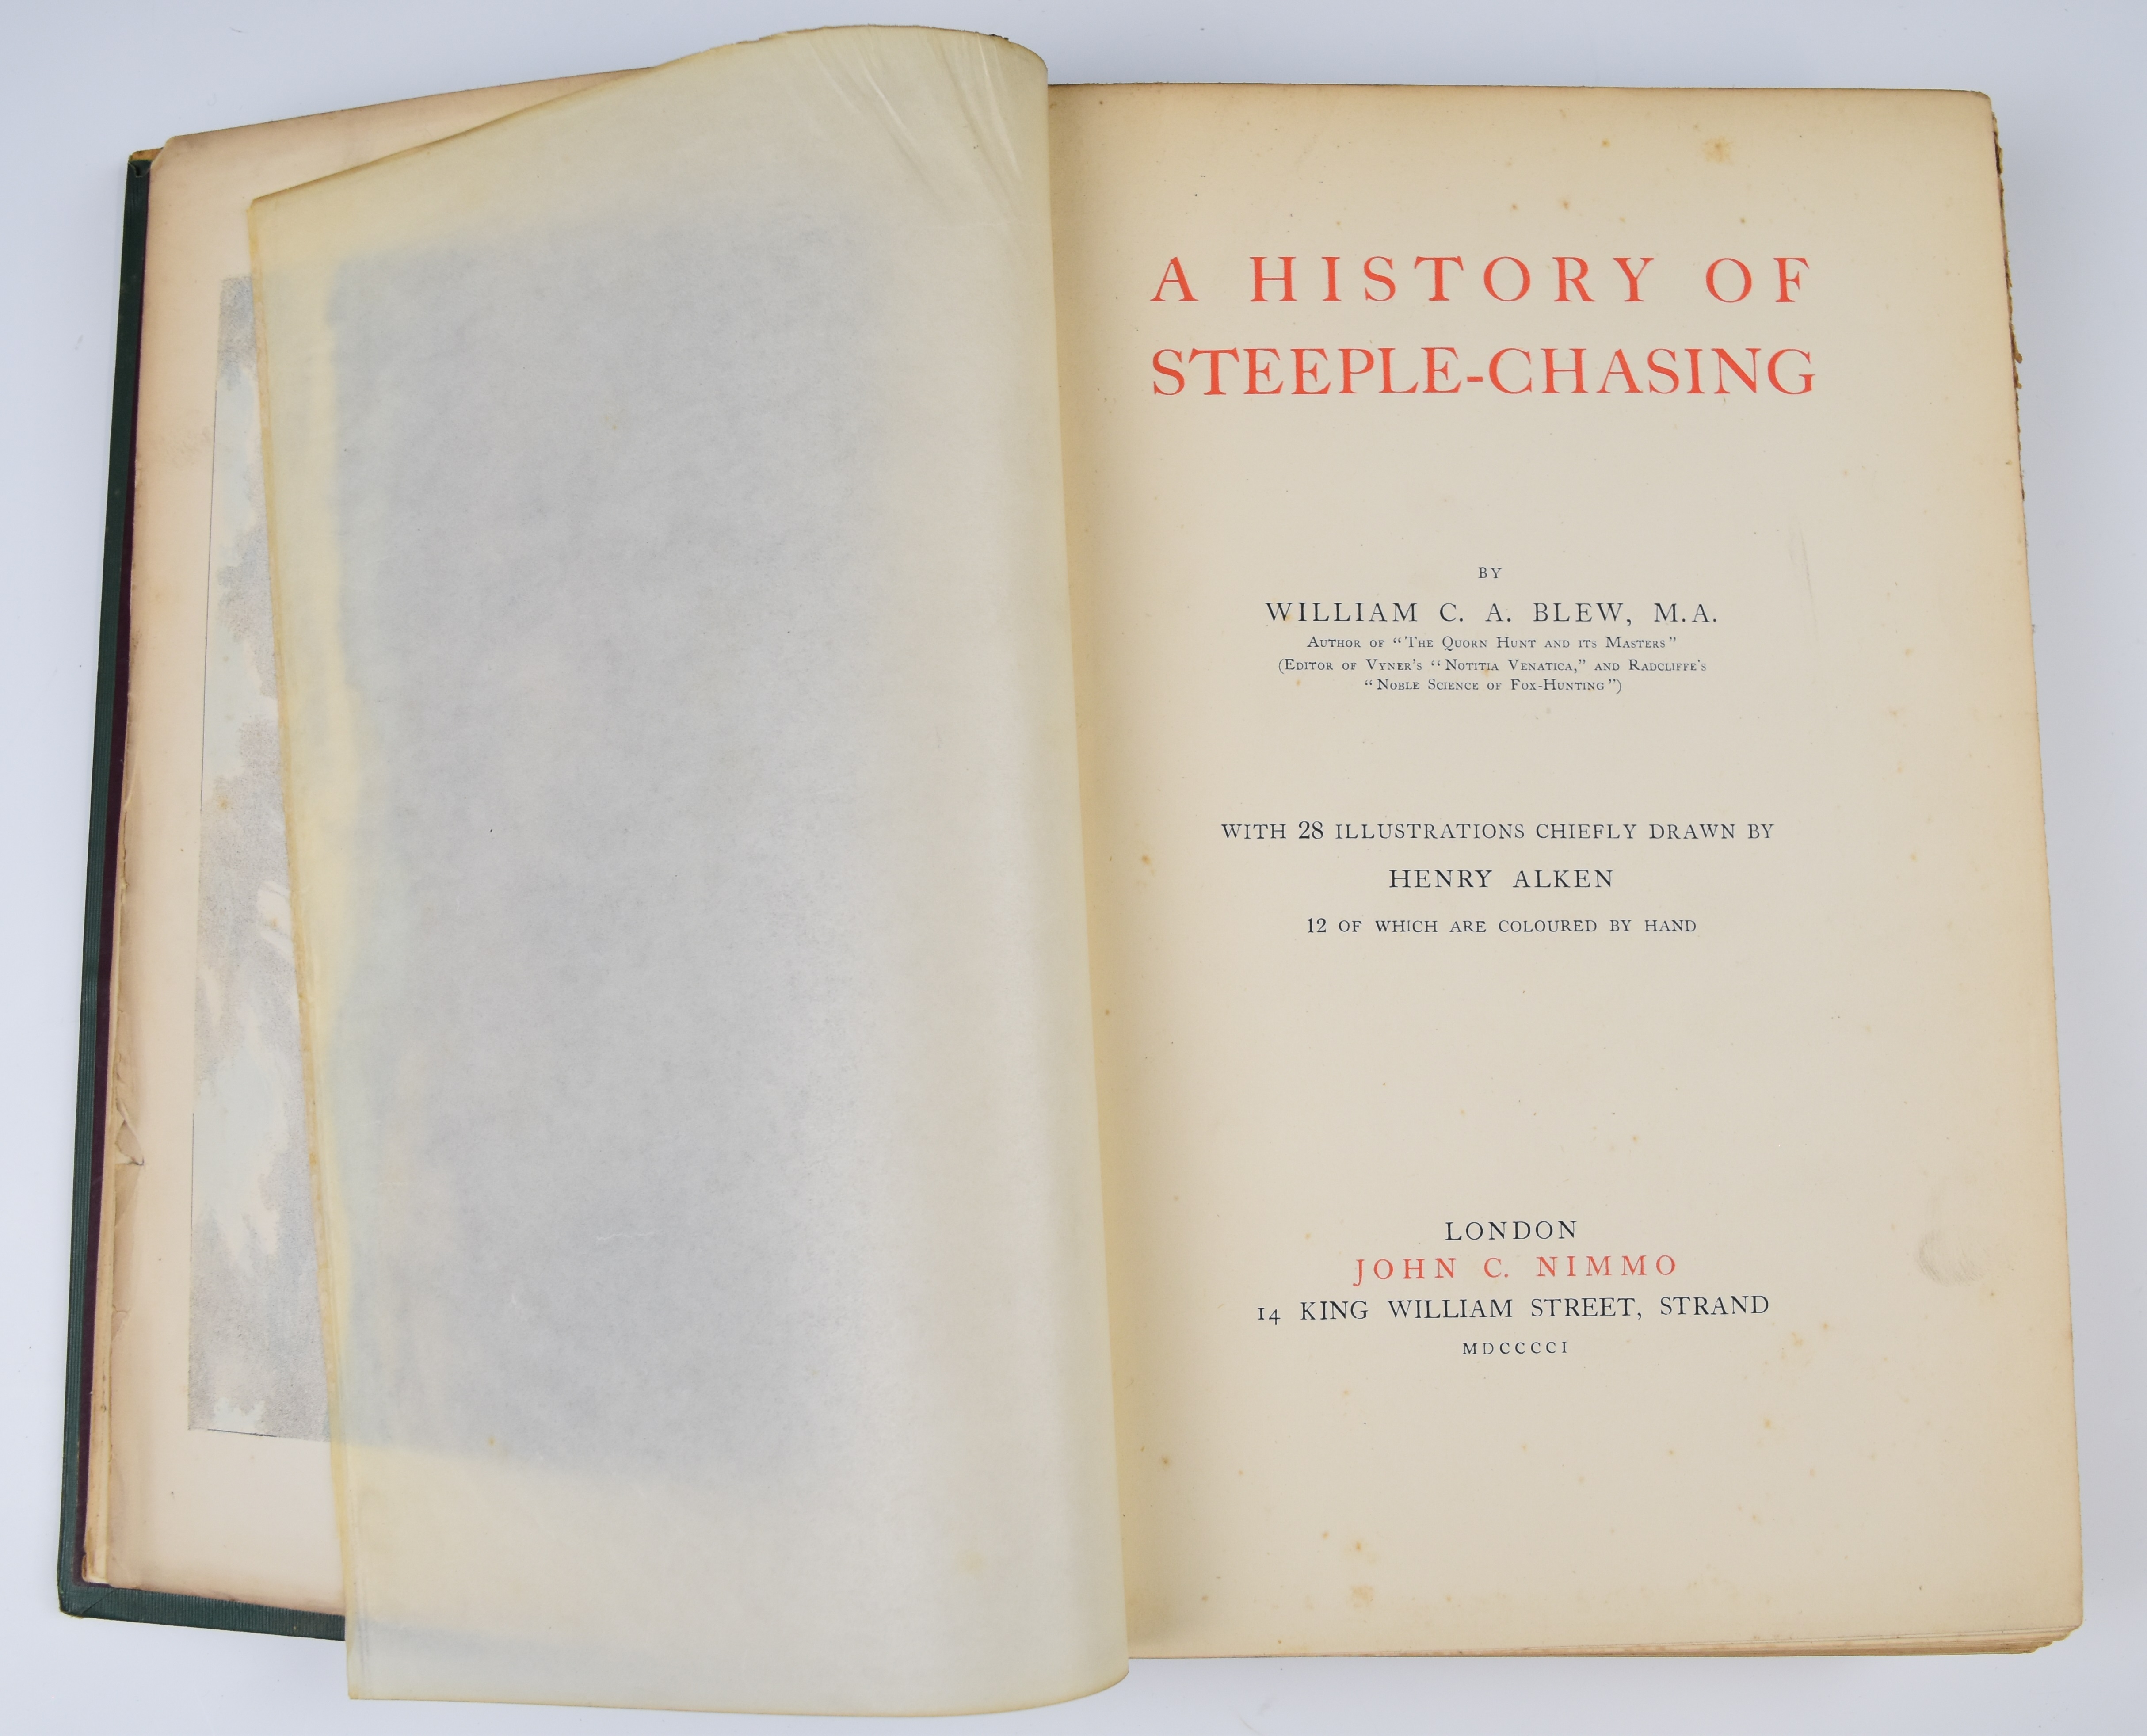 A History of Steeple-Chasing by William C.A. Blew with 28 illustrations chiefly drawn by Henry - Image 2 of 5